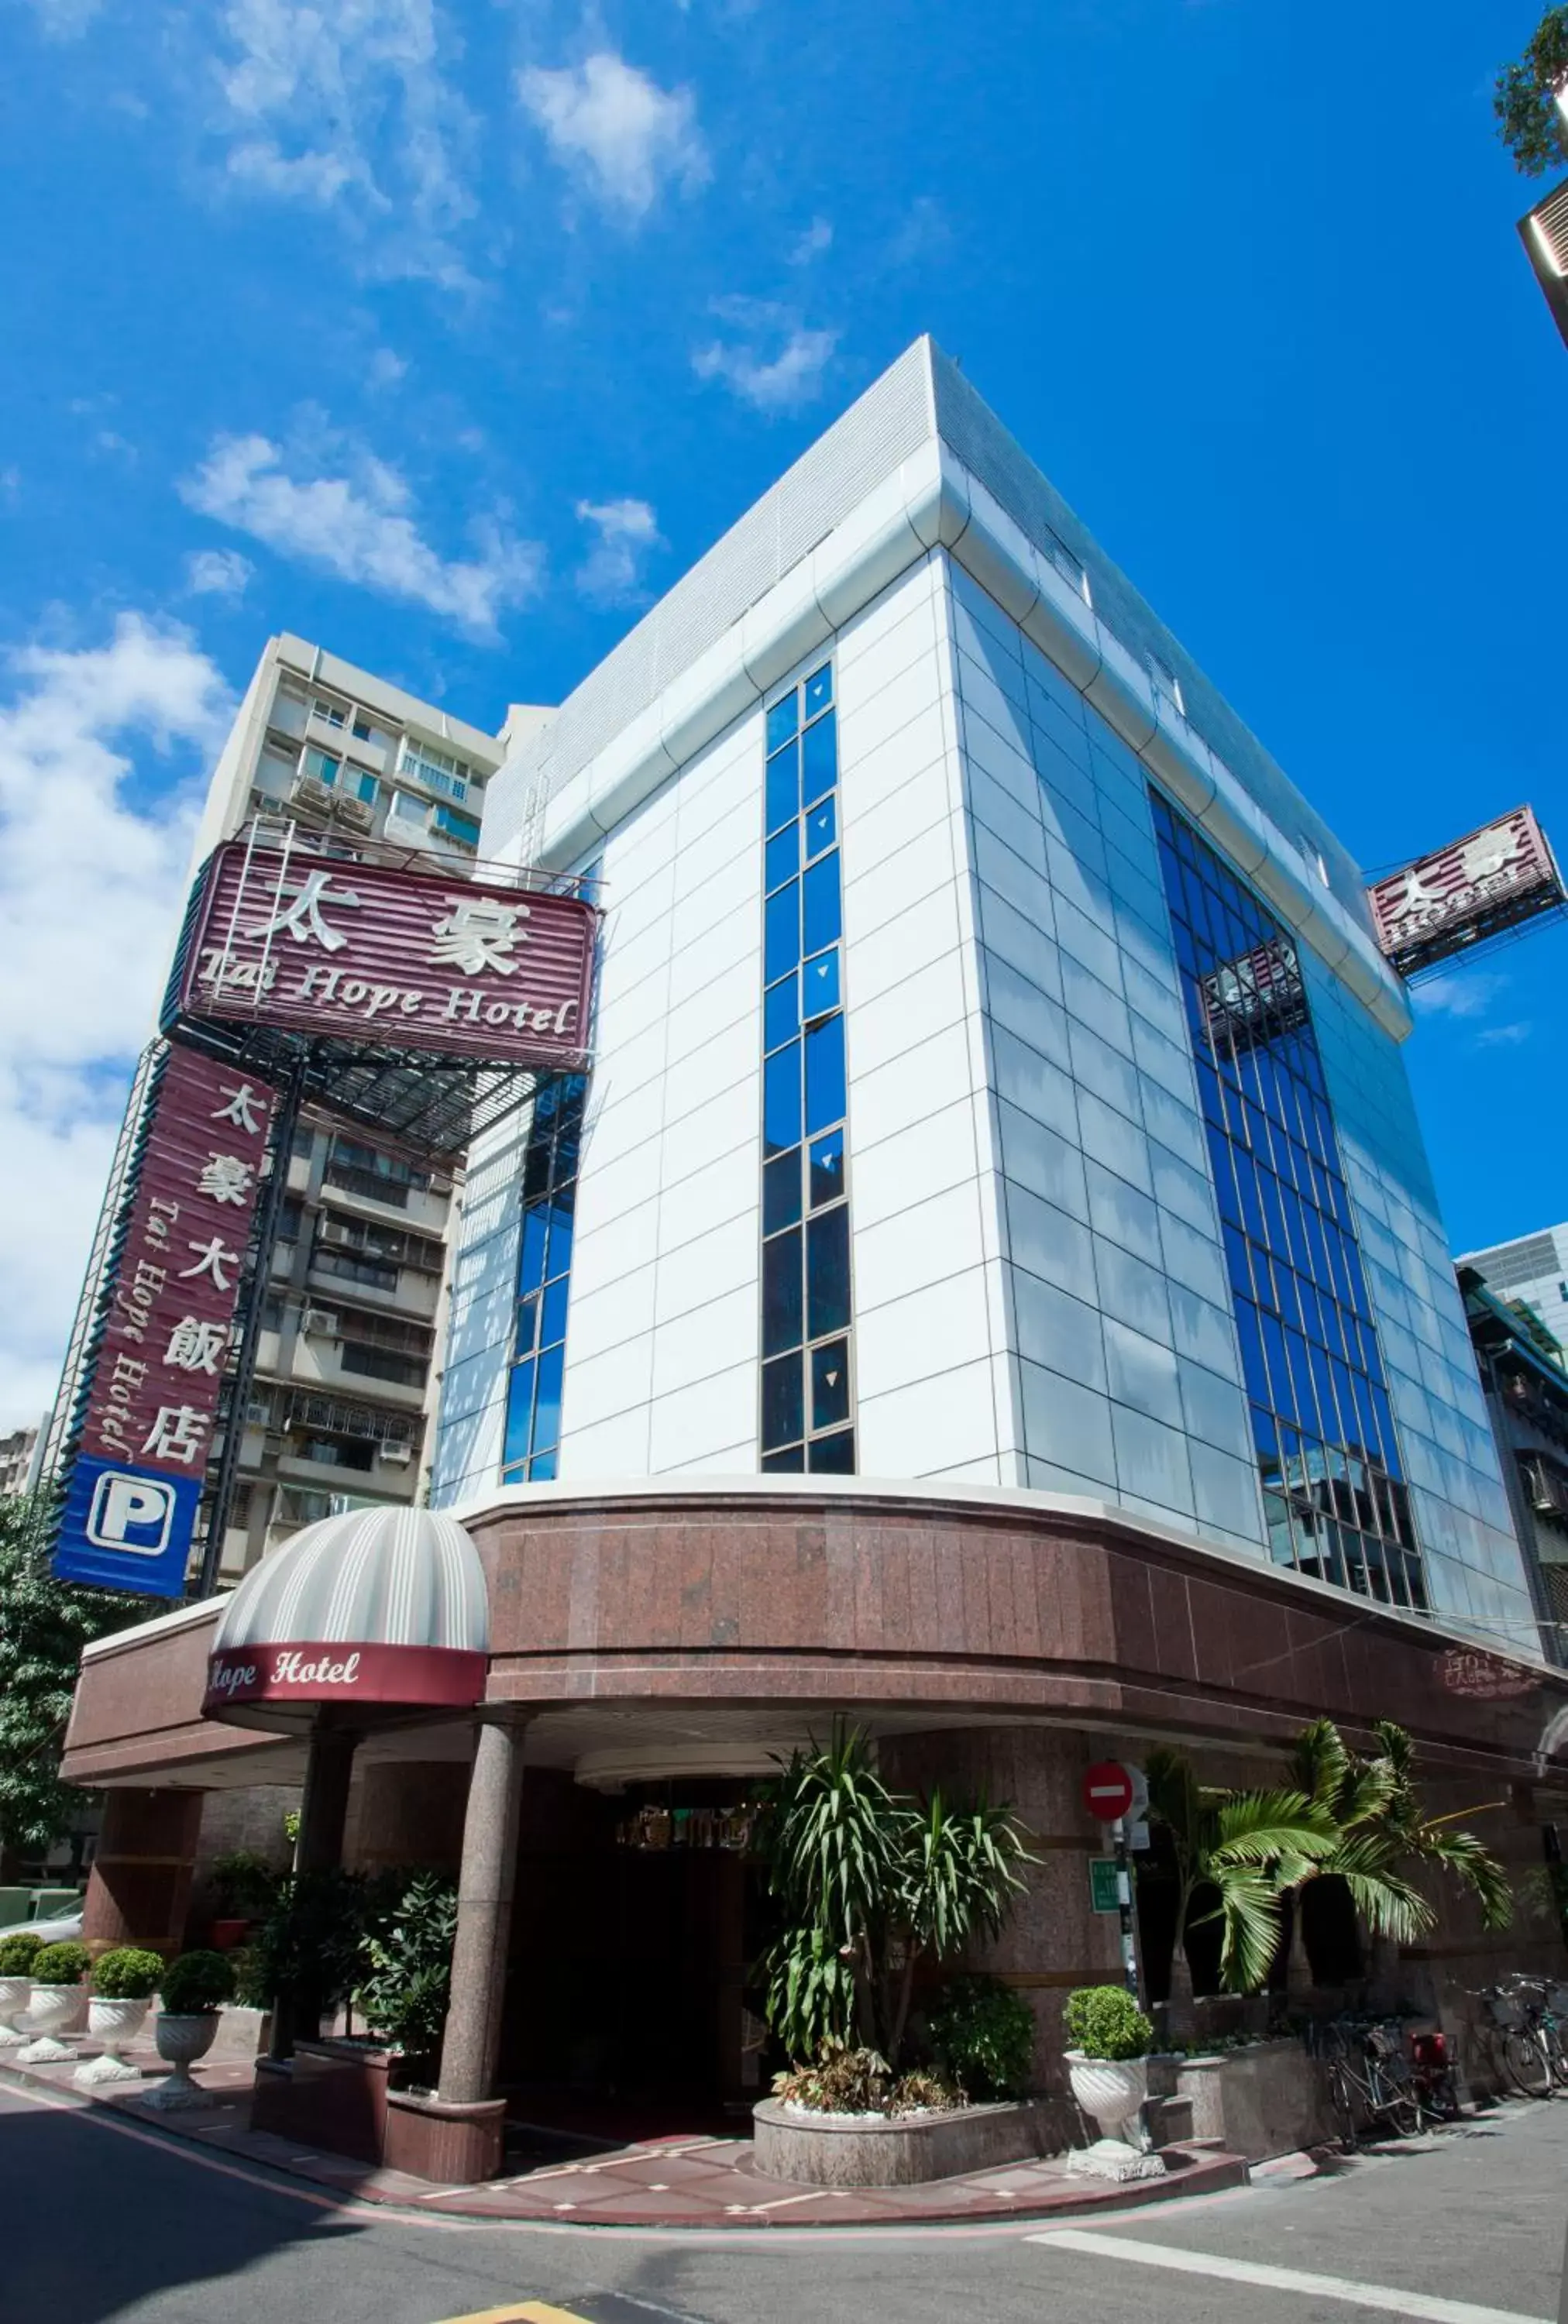 Property Building in Tai Hope Hotel